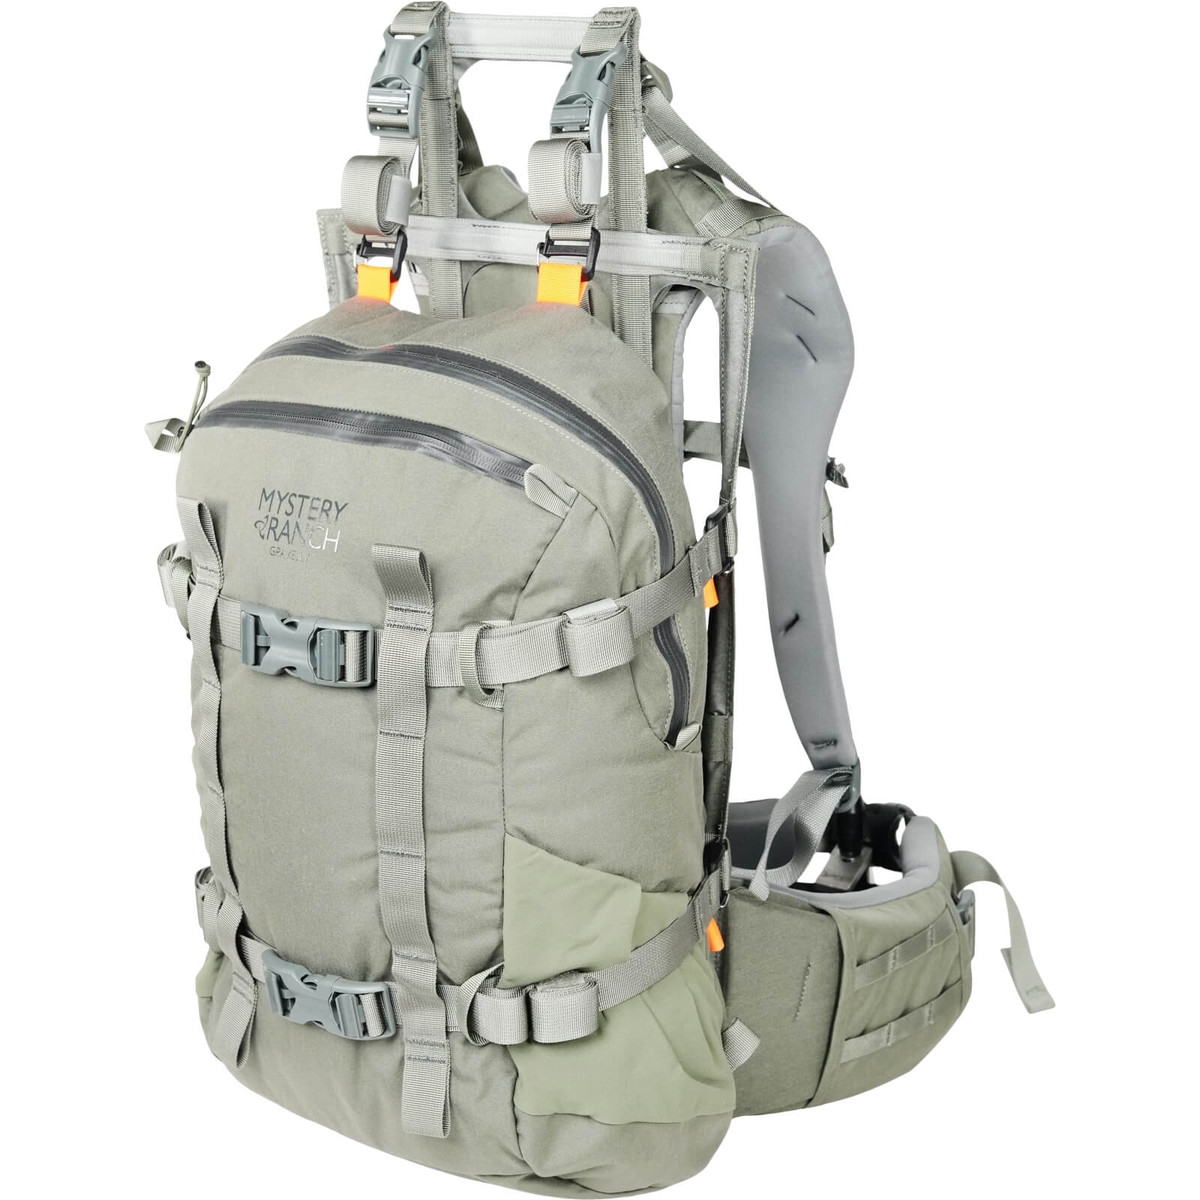 Gravelly 18 Backpack | Mystery Ranch | Adventure Gear Canada